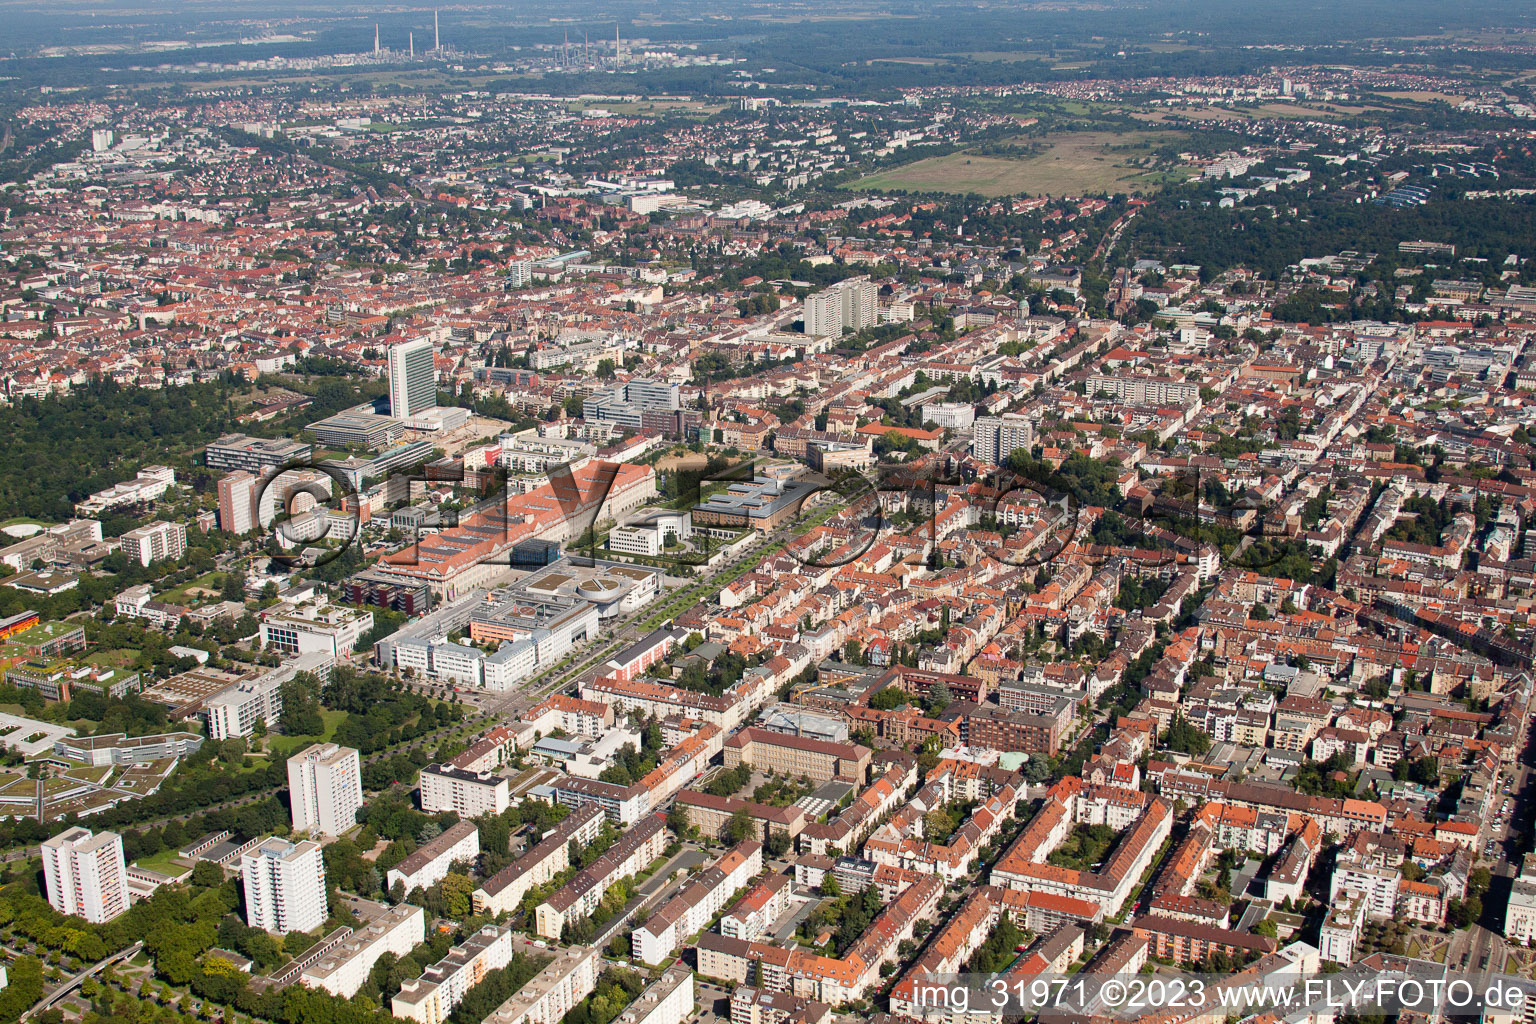 Oblique view of Brauerstr in the district Südweststadt in Karlsruhe in the state Baden-Wuerttemberg, Germany